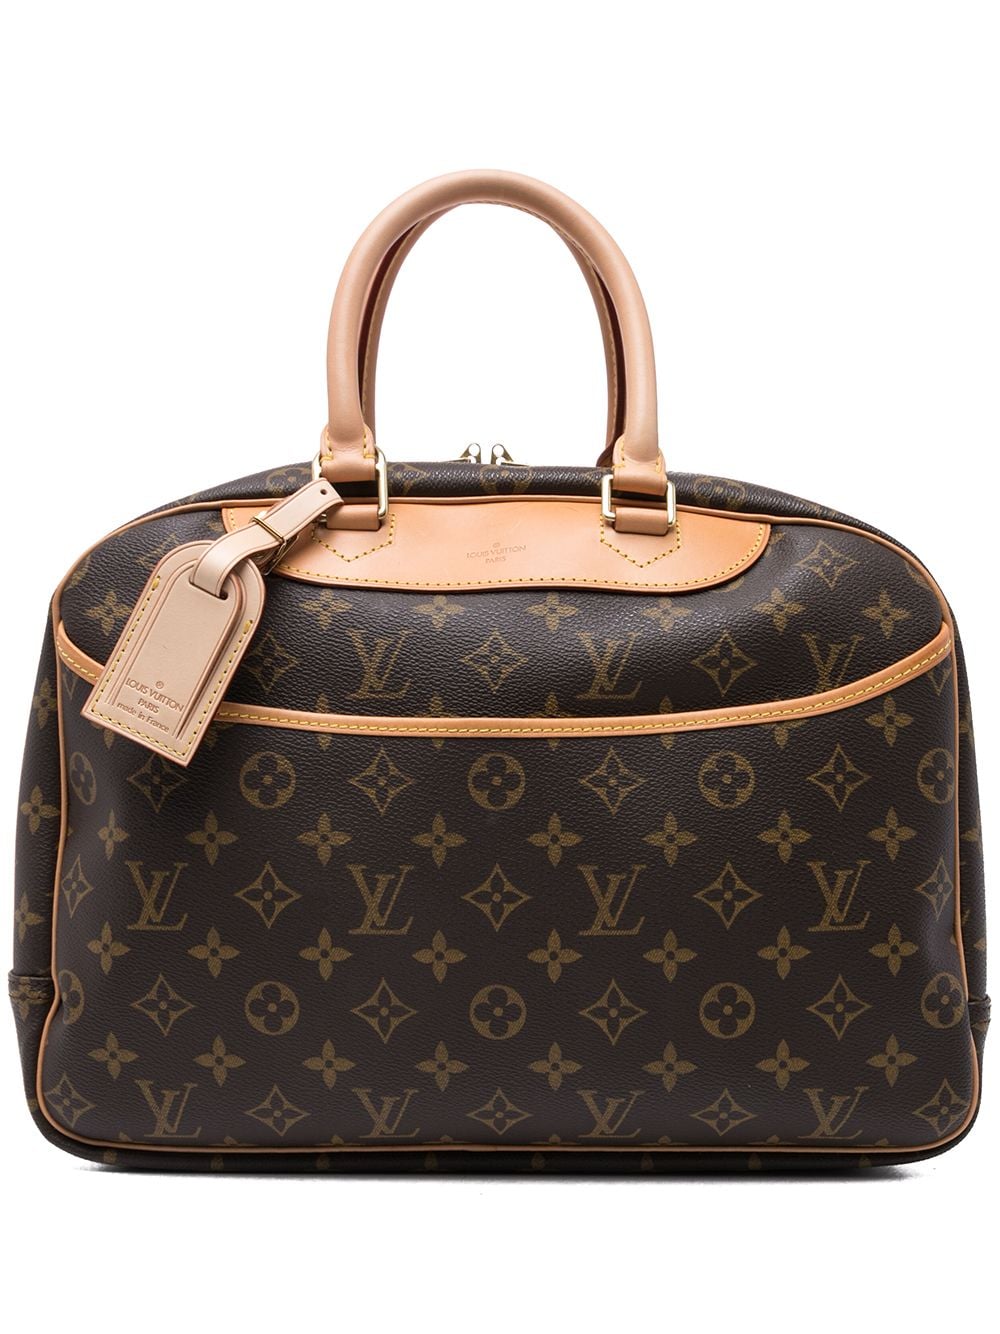 Louis Vuitton 2000s pre-owned Deauville bowling bag - Brown